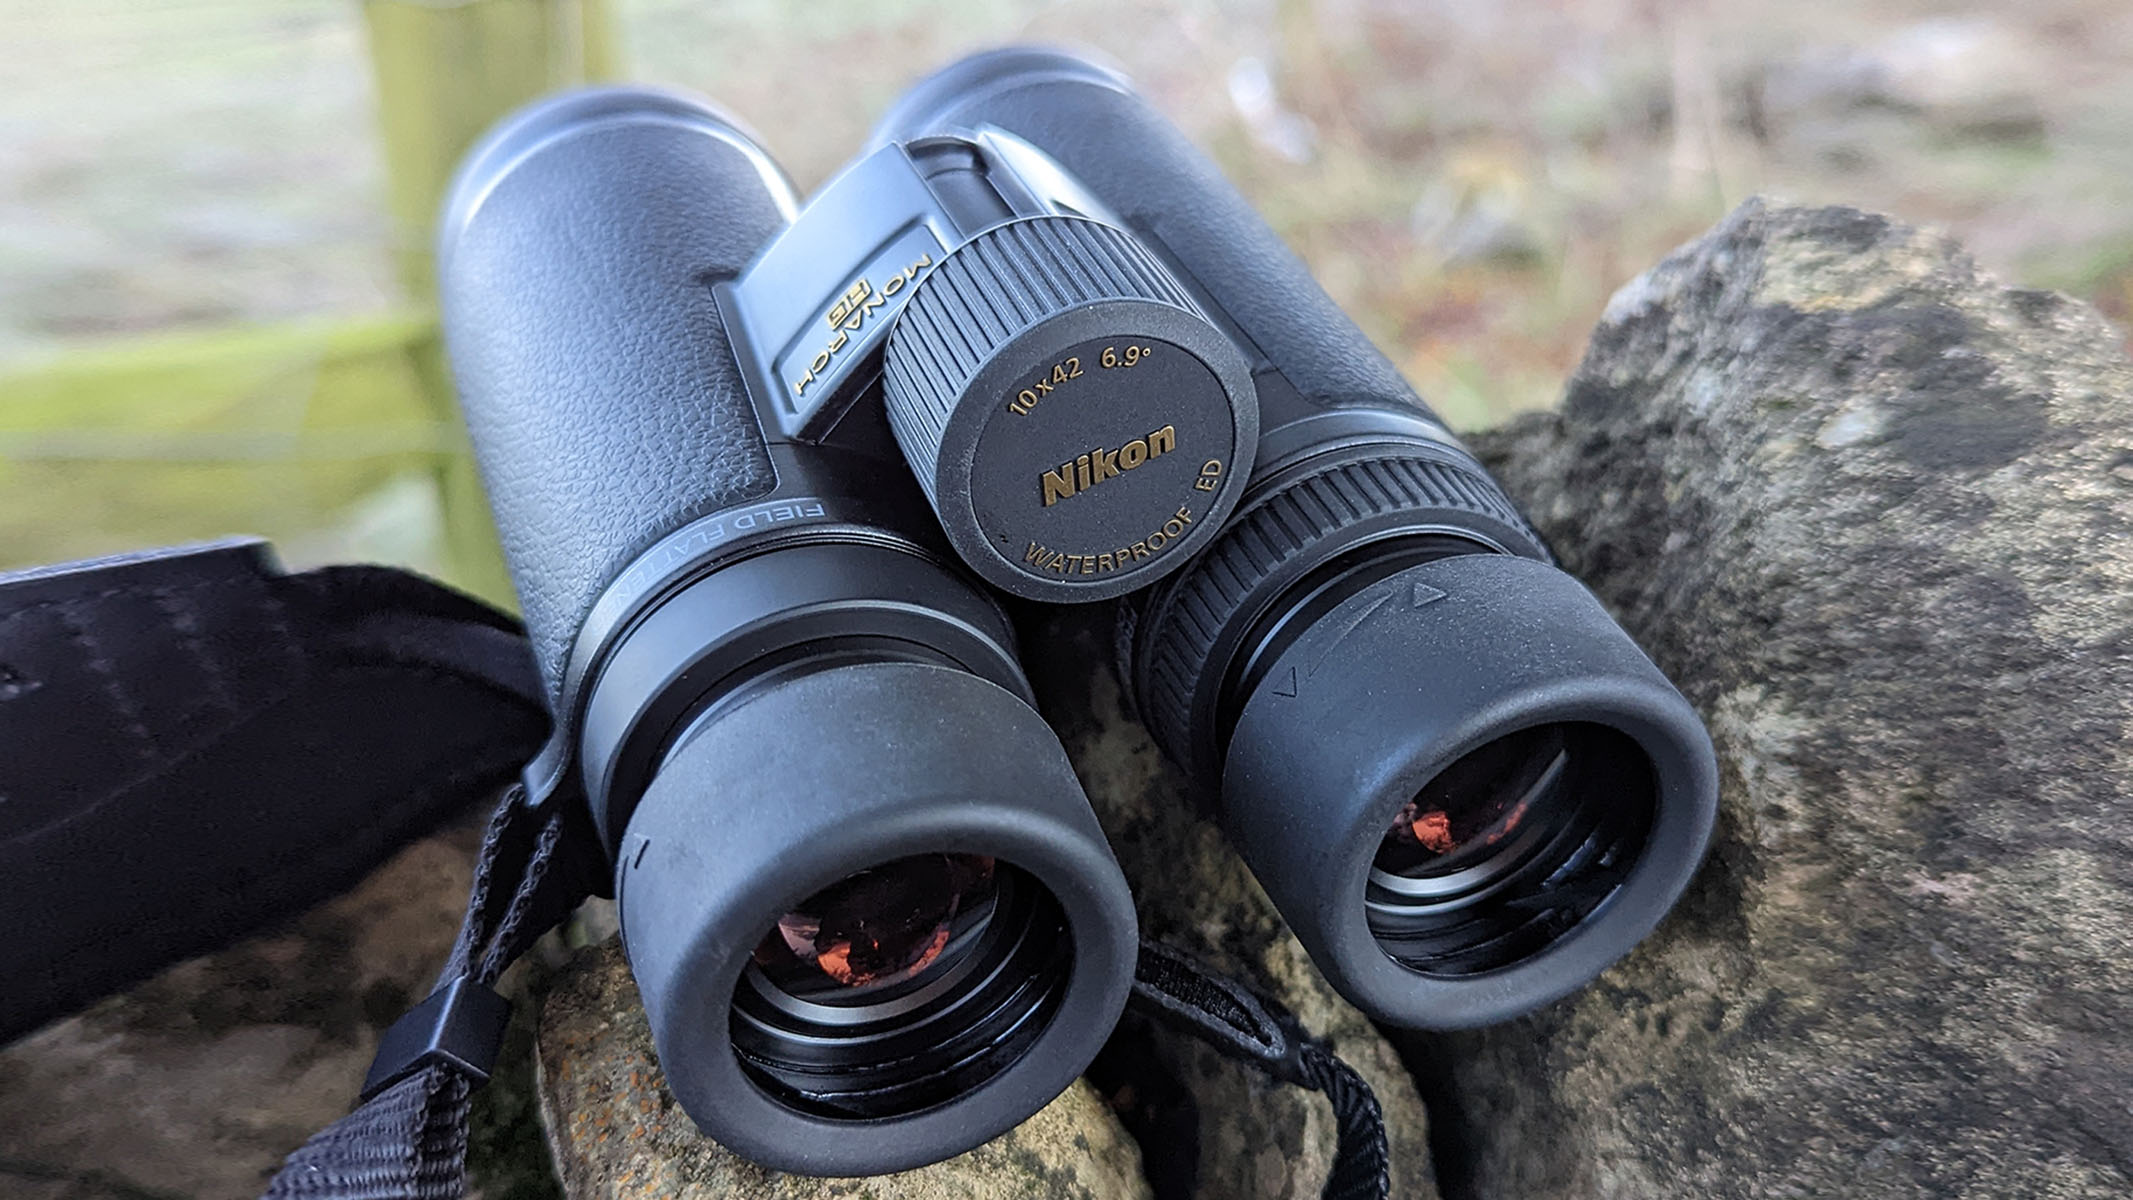 Close-up view of binocular icons